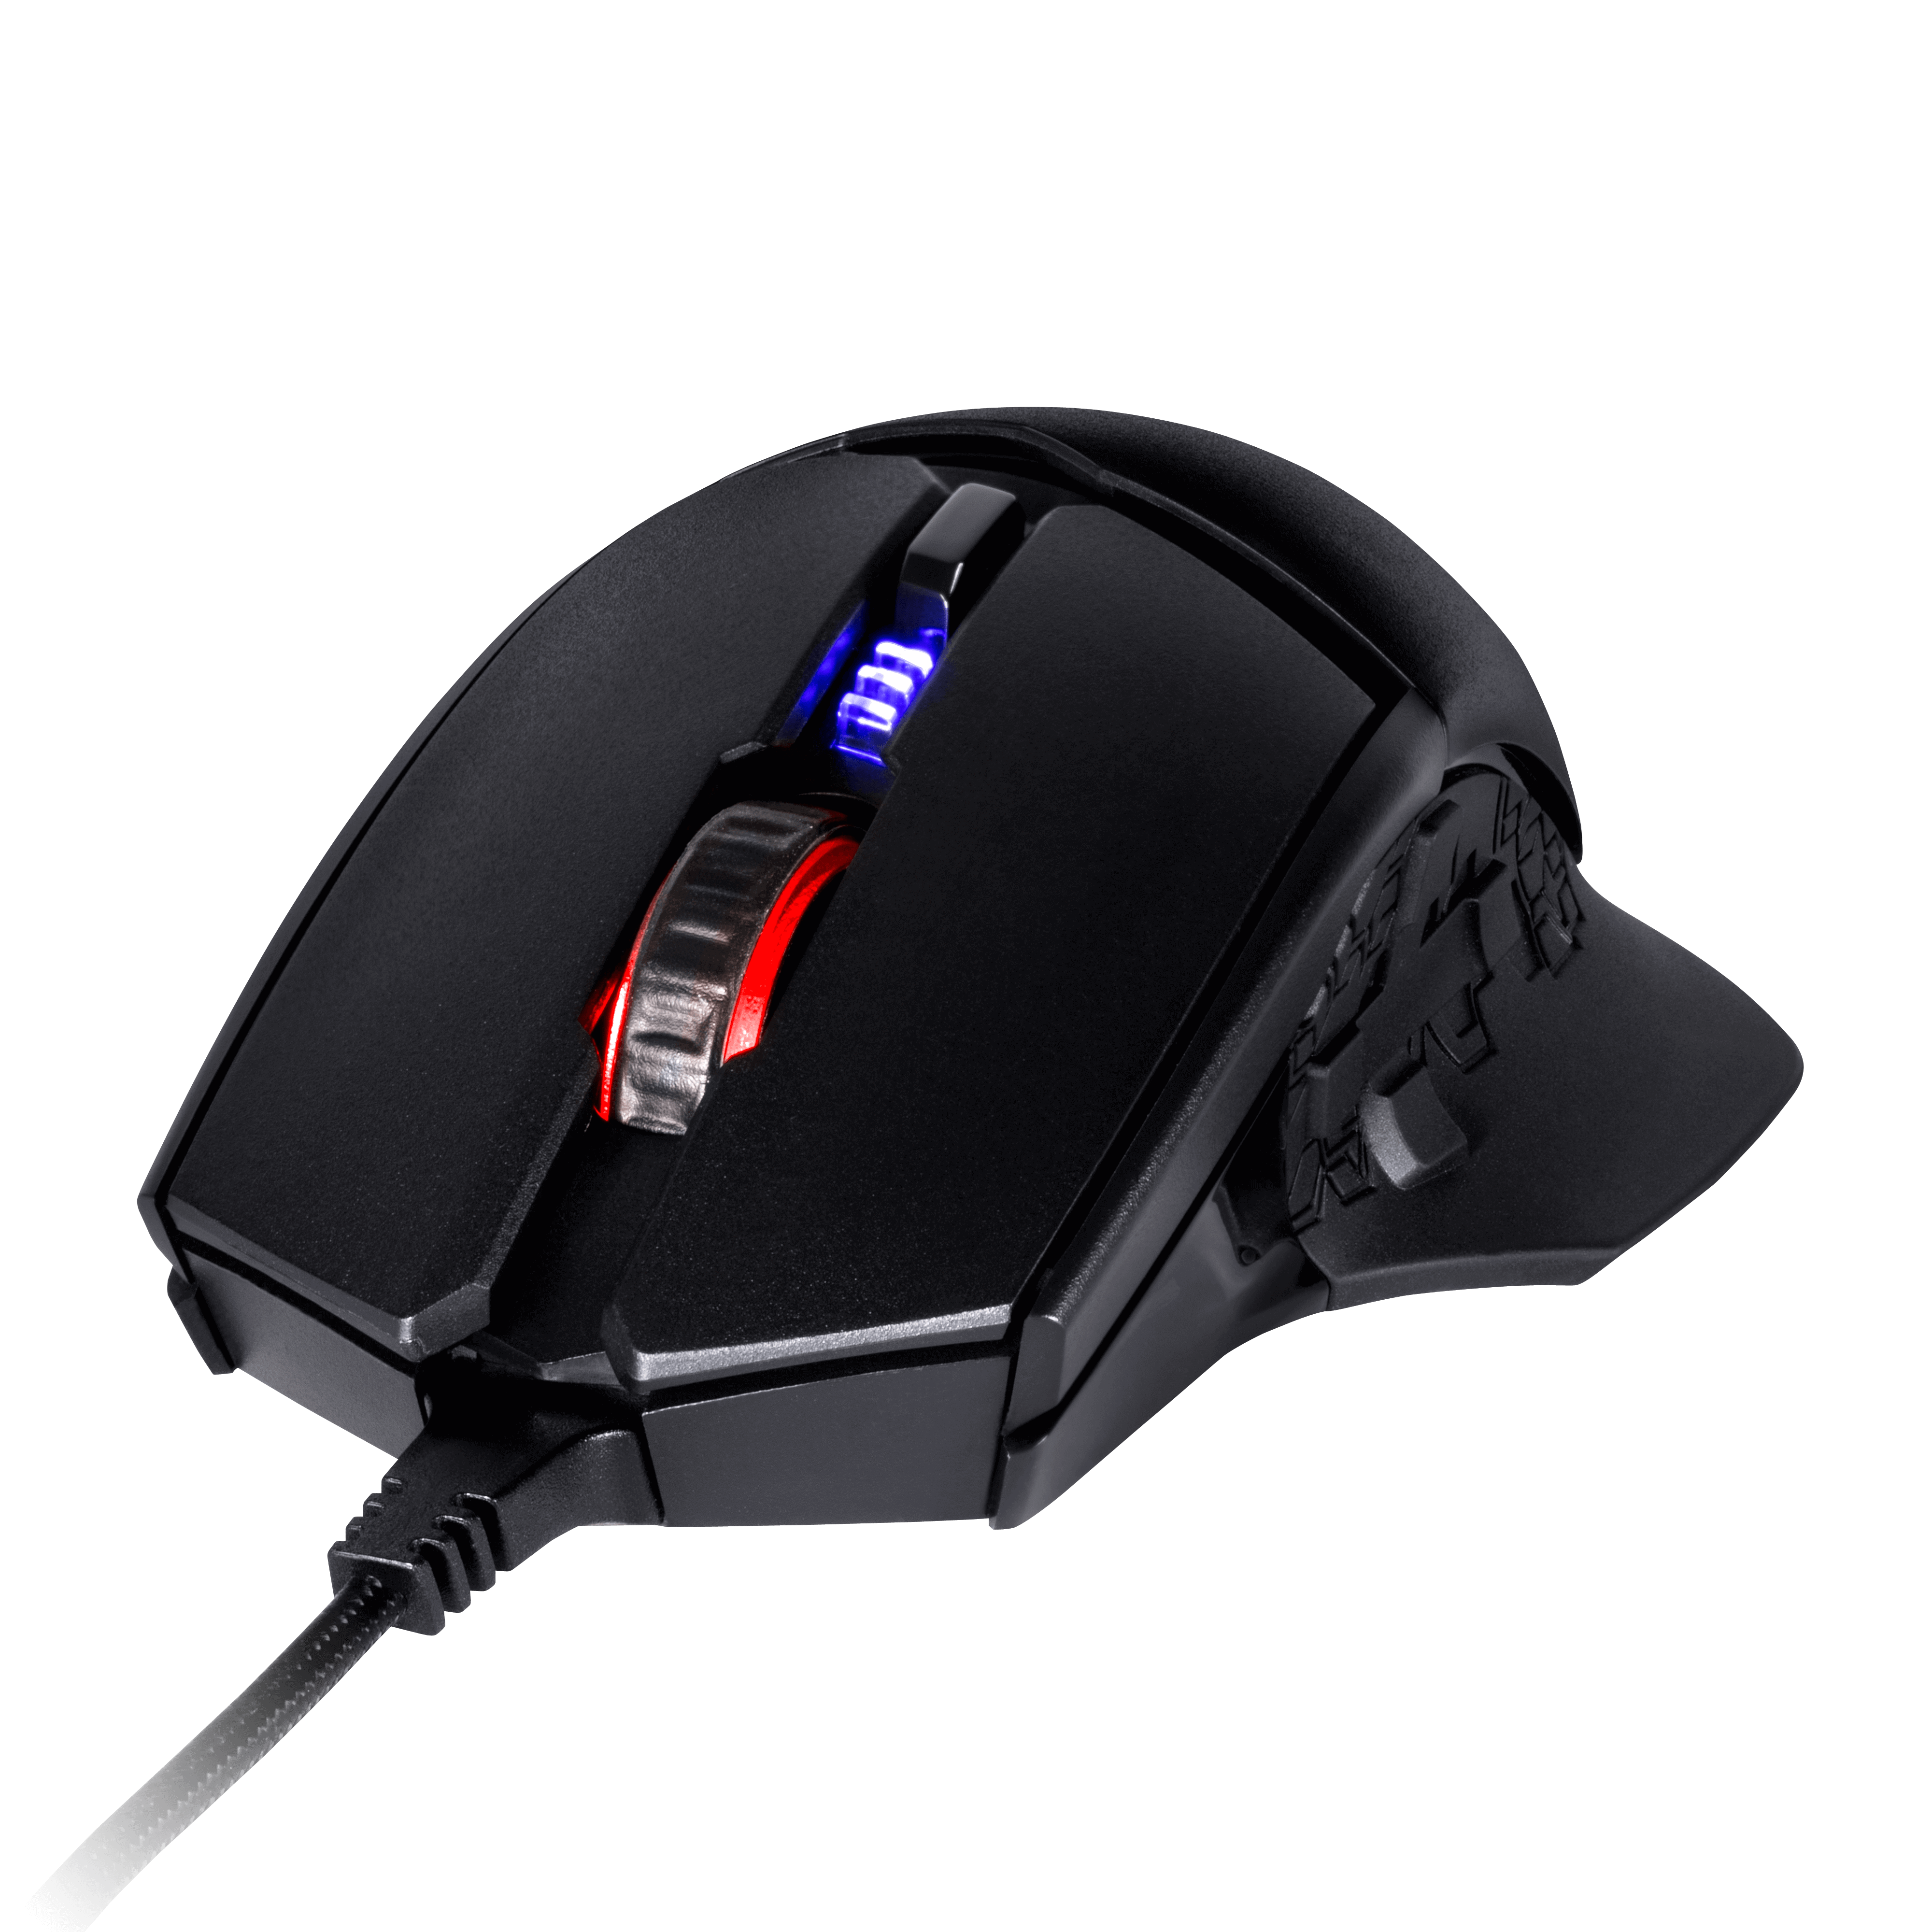 MM830 Gaming Mouse | Cooler Master